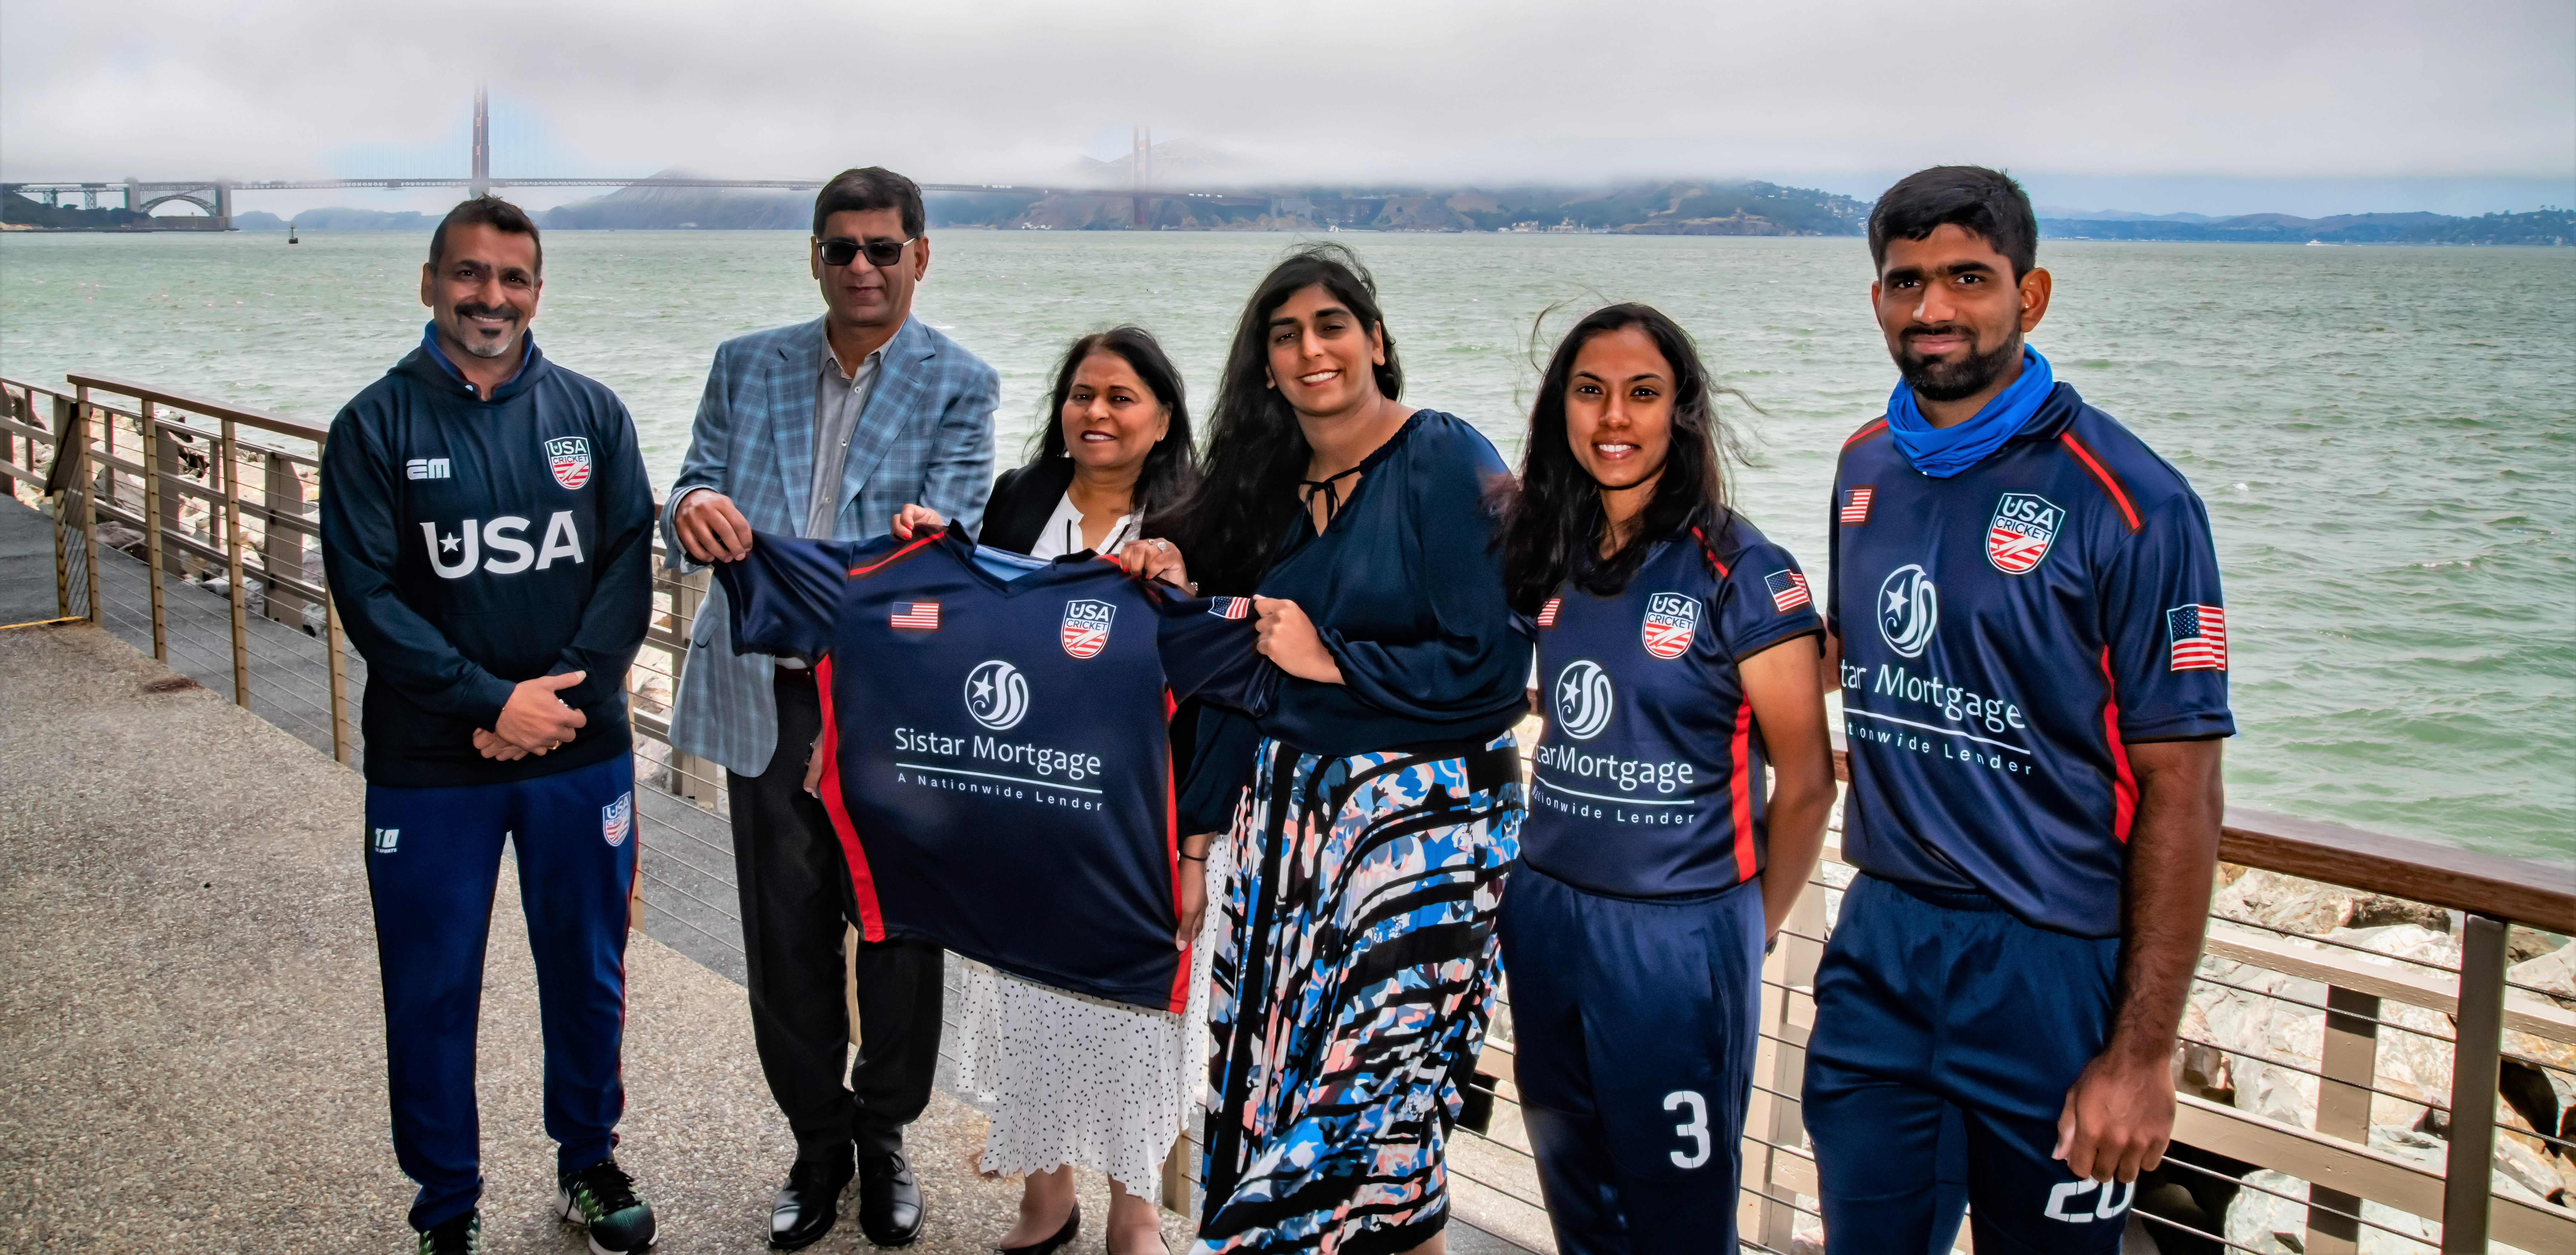 Sistar Mortgage Unveiled as Principal Sponsor of National Teams and Founding Partner of Women’s Domestic Cricket Structure